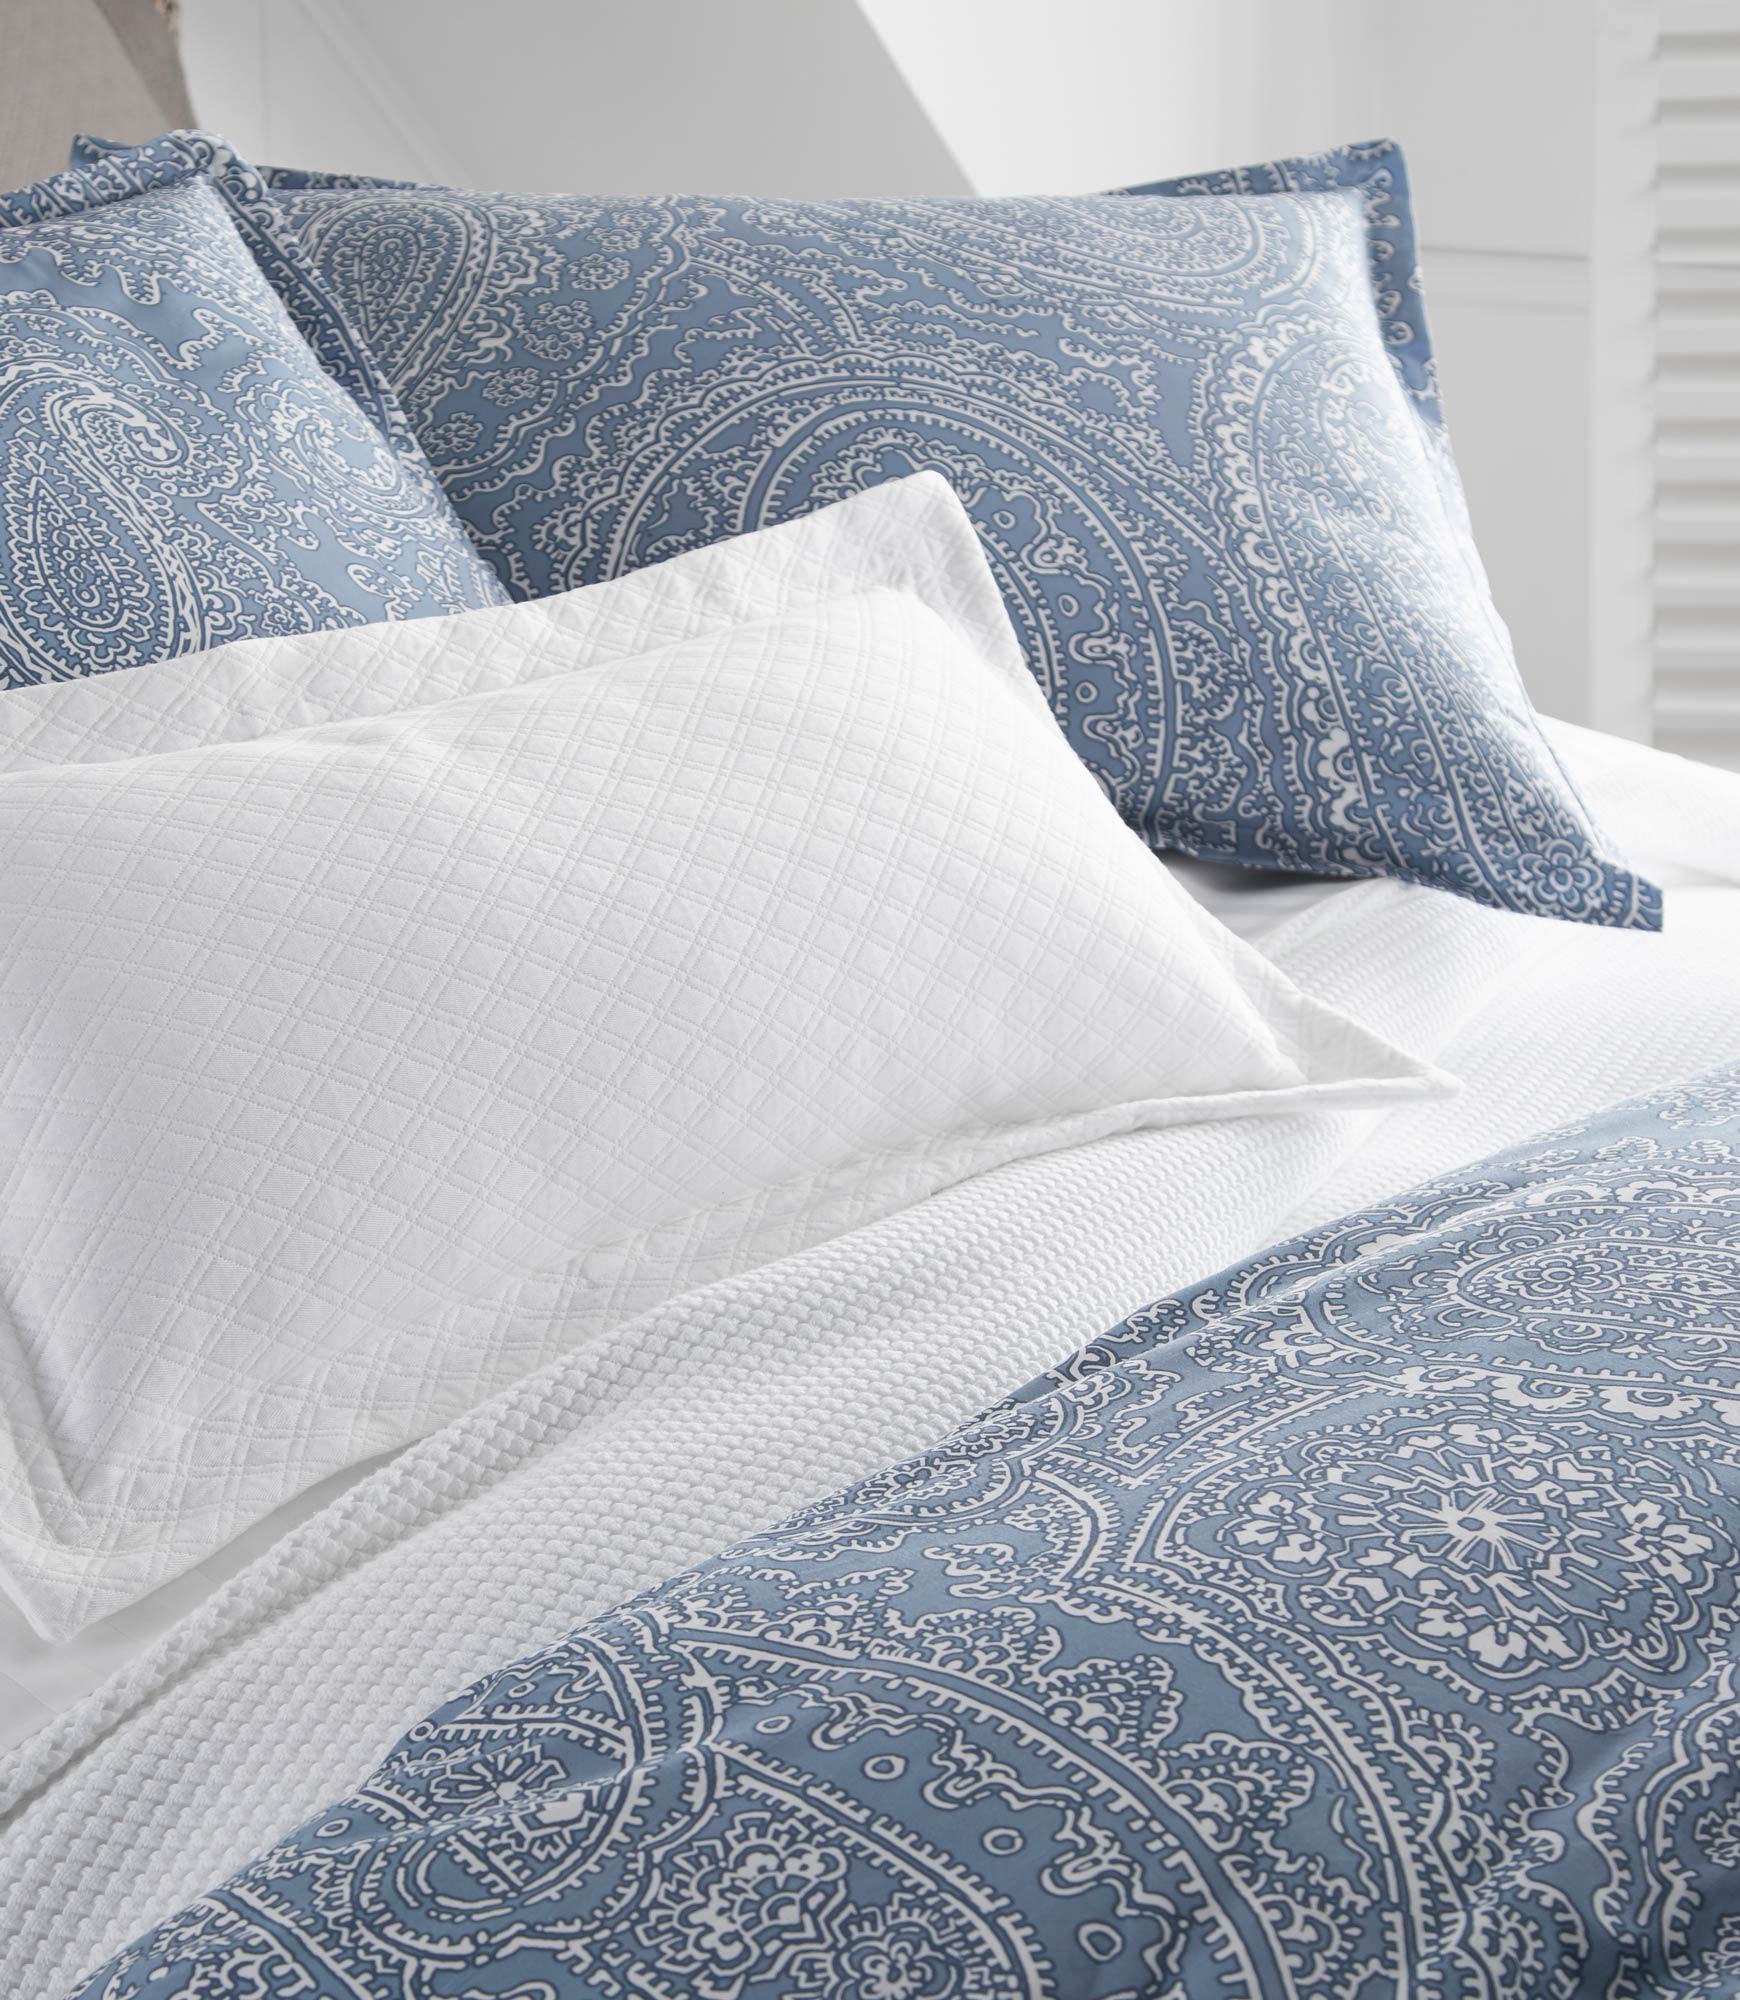 Blue coastal paisley duvet cover and shams on bed detail